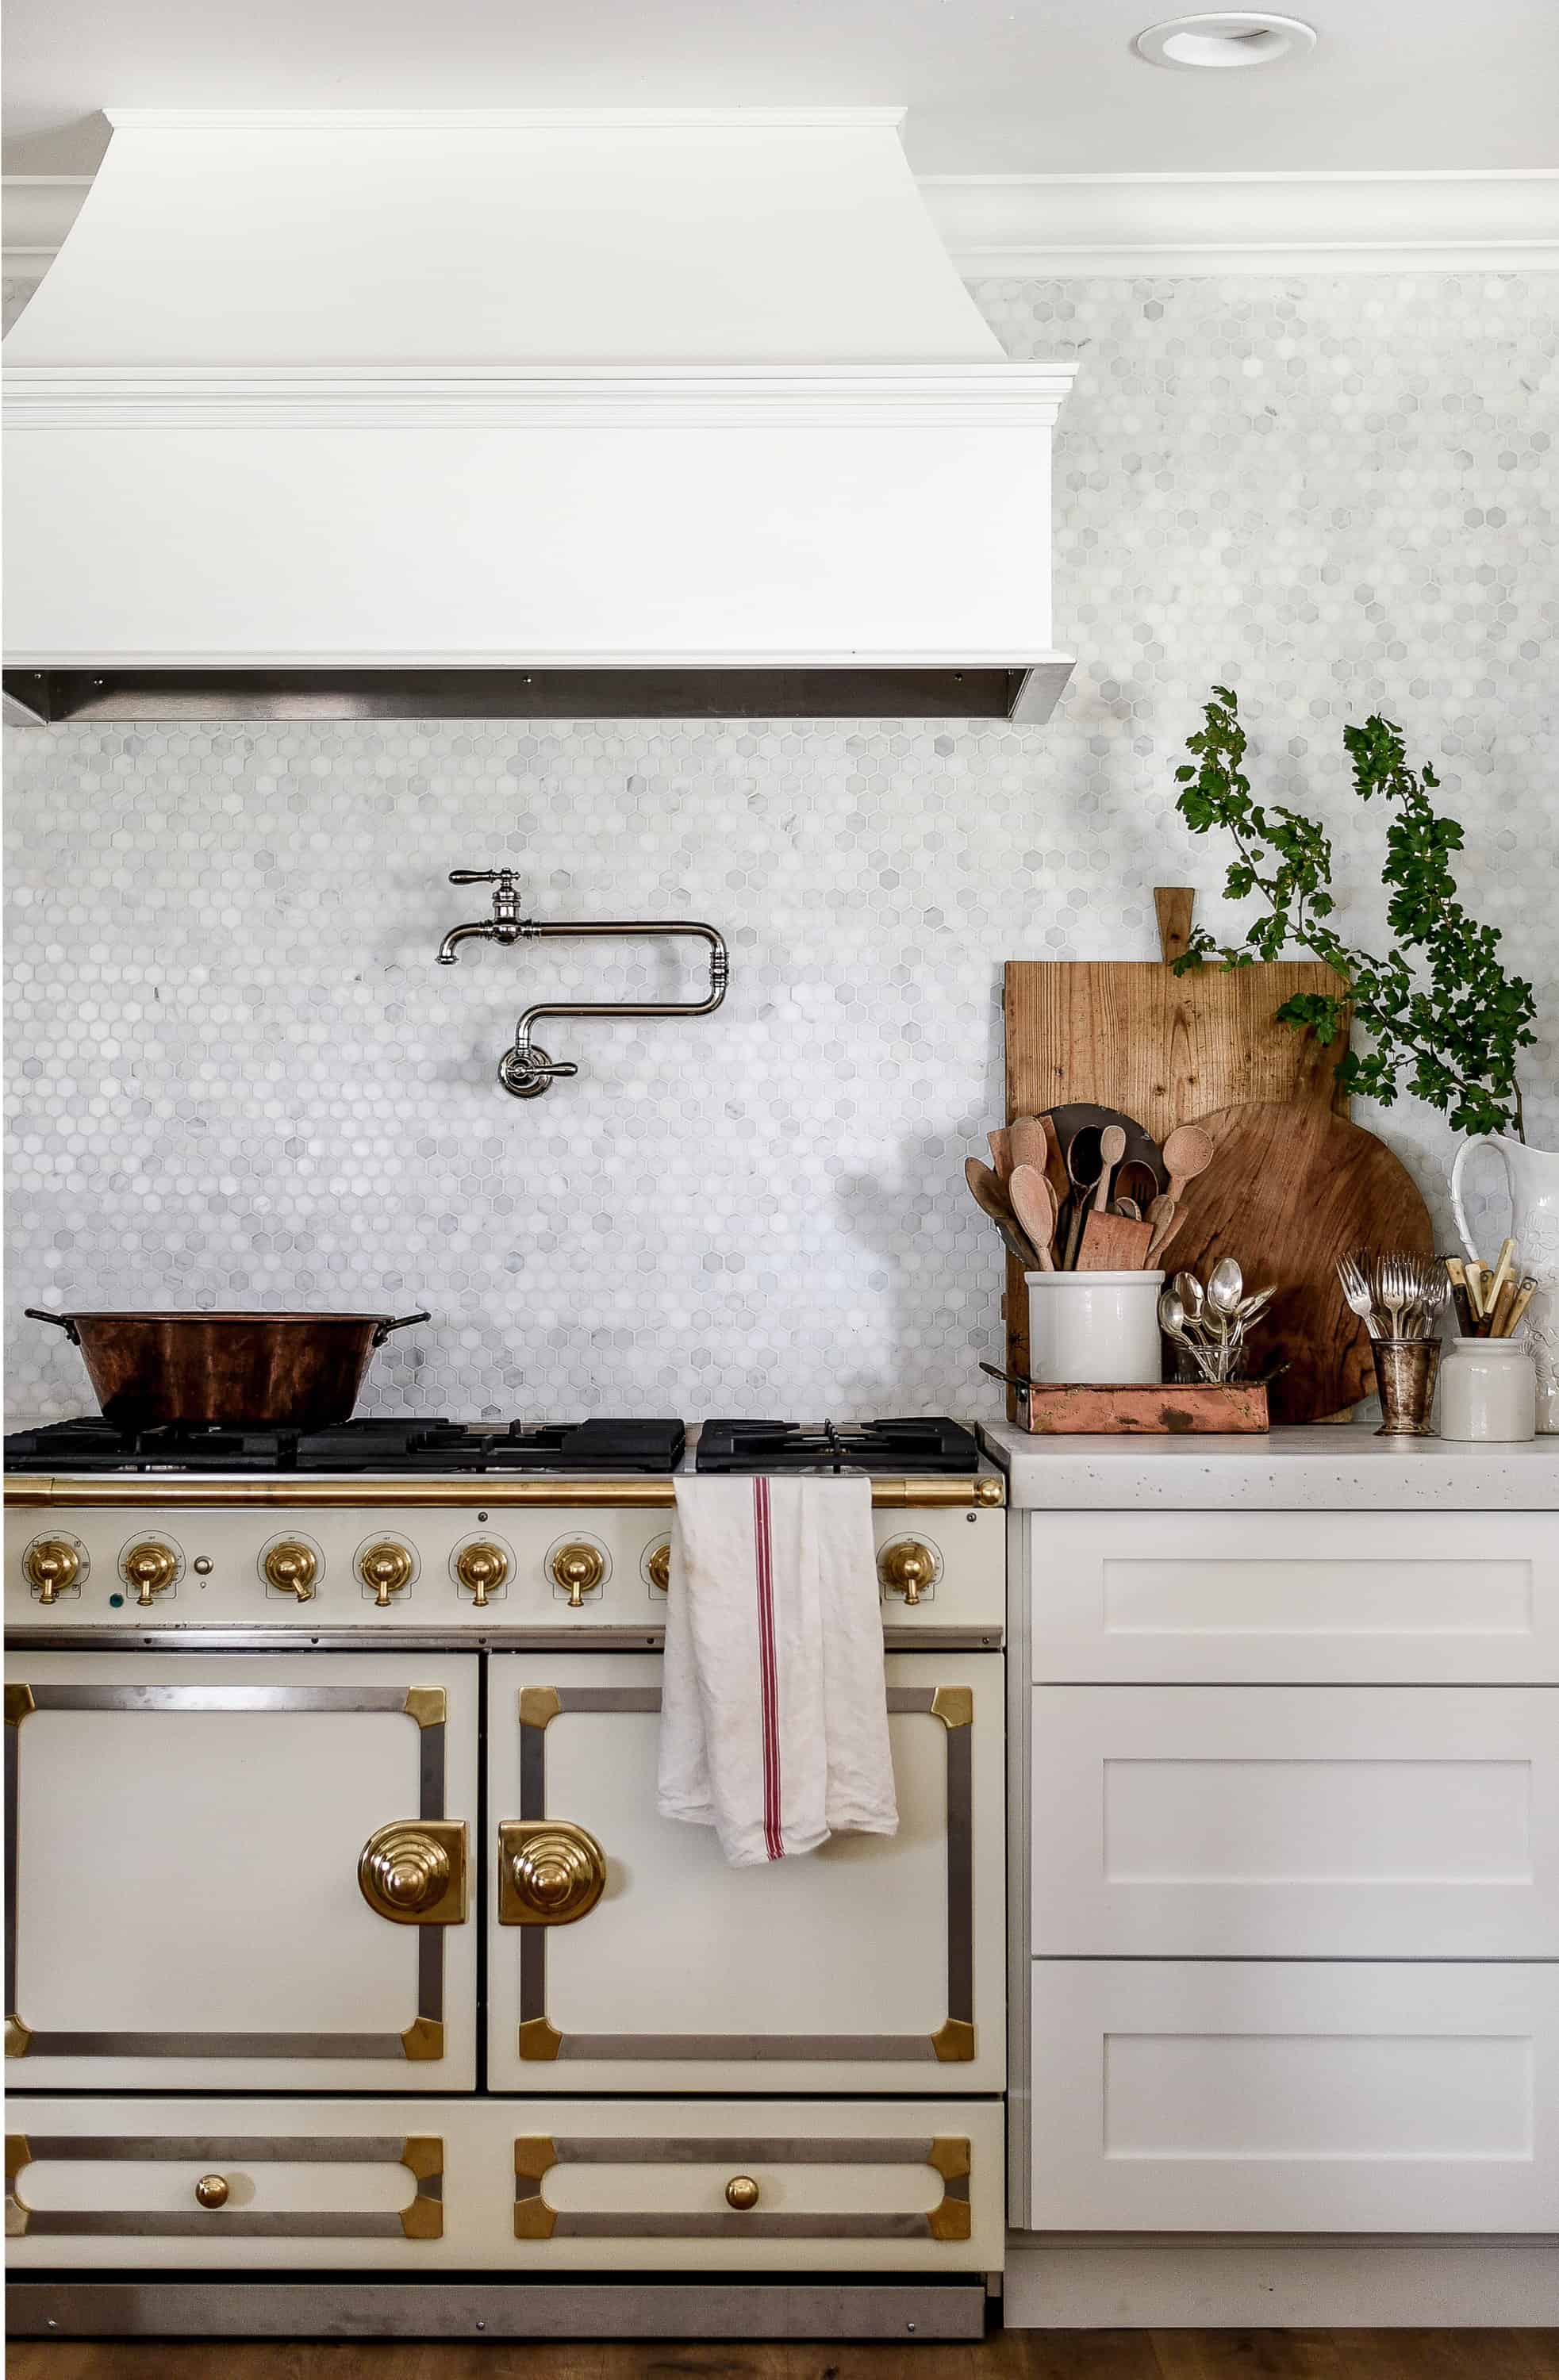 I mentioned that when we began remodeling, someone from the Kohler team reached out to see if I might be interested in collaborating with them in our kitchen. Since I had already fallen in love with their extra wide, extra deep apron front sink, I was happy to jump on board to create our farmhouse kitchen with their designs. 